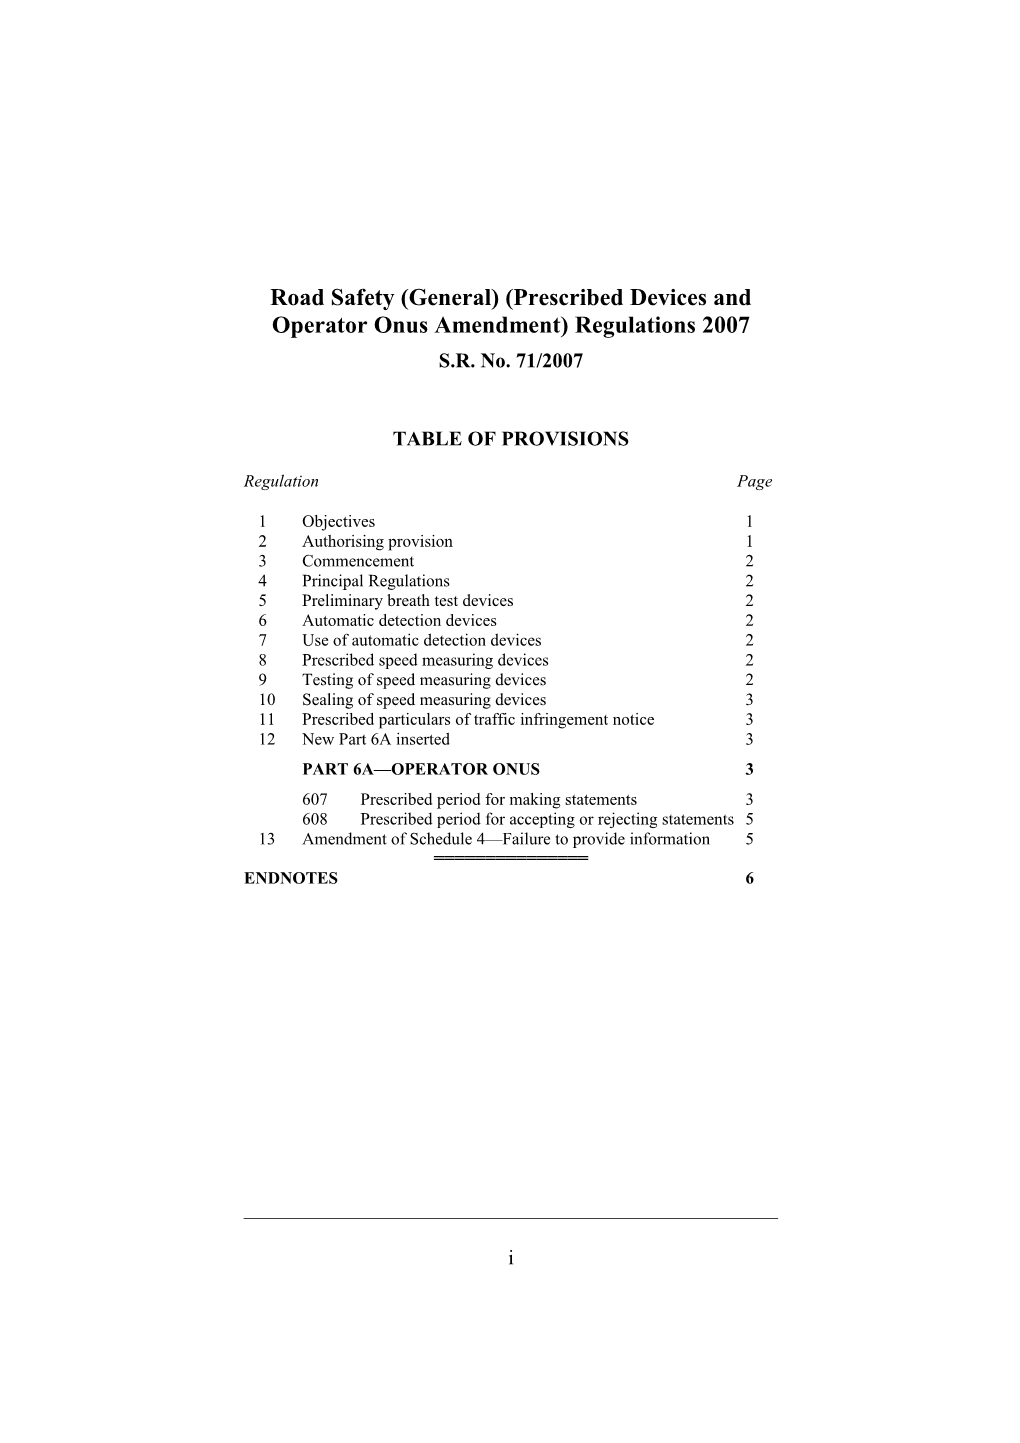 Road Safety (General) (Prescribed Devices and Operator Onus Amendment) Regulations 2007